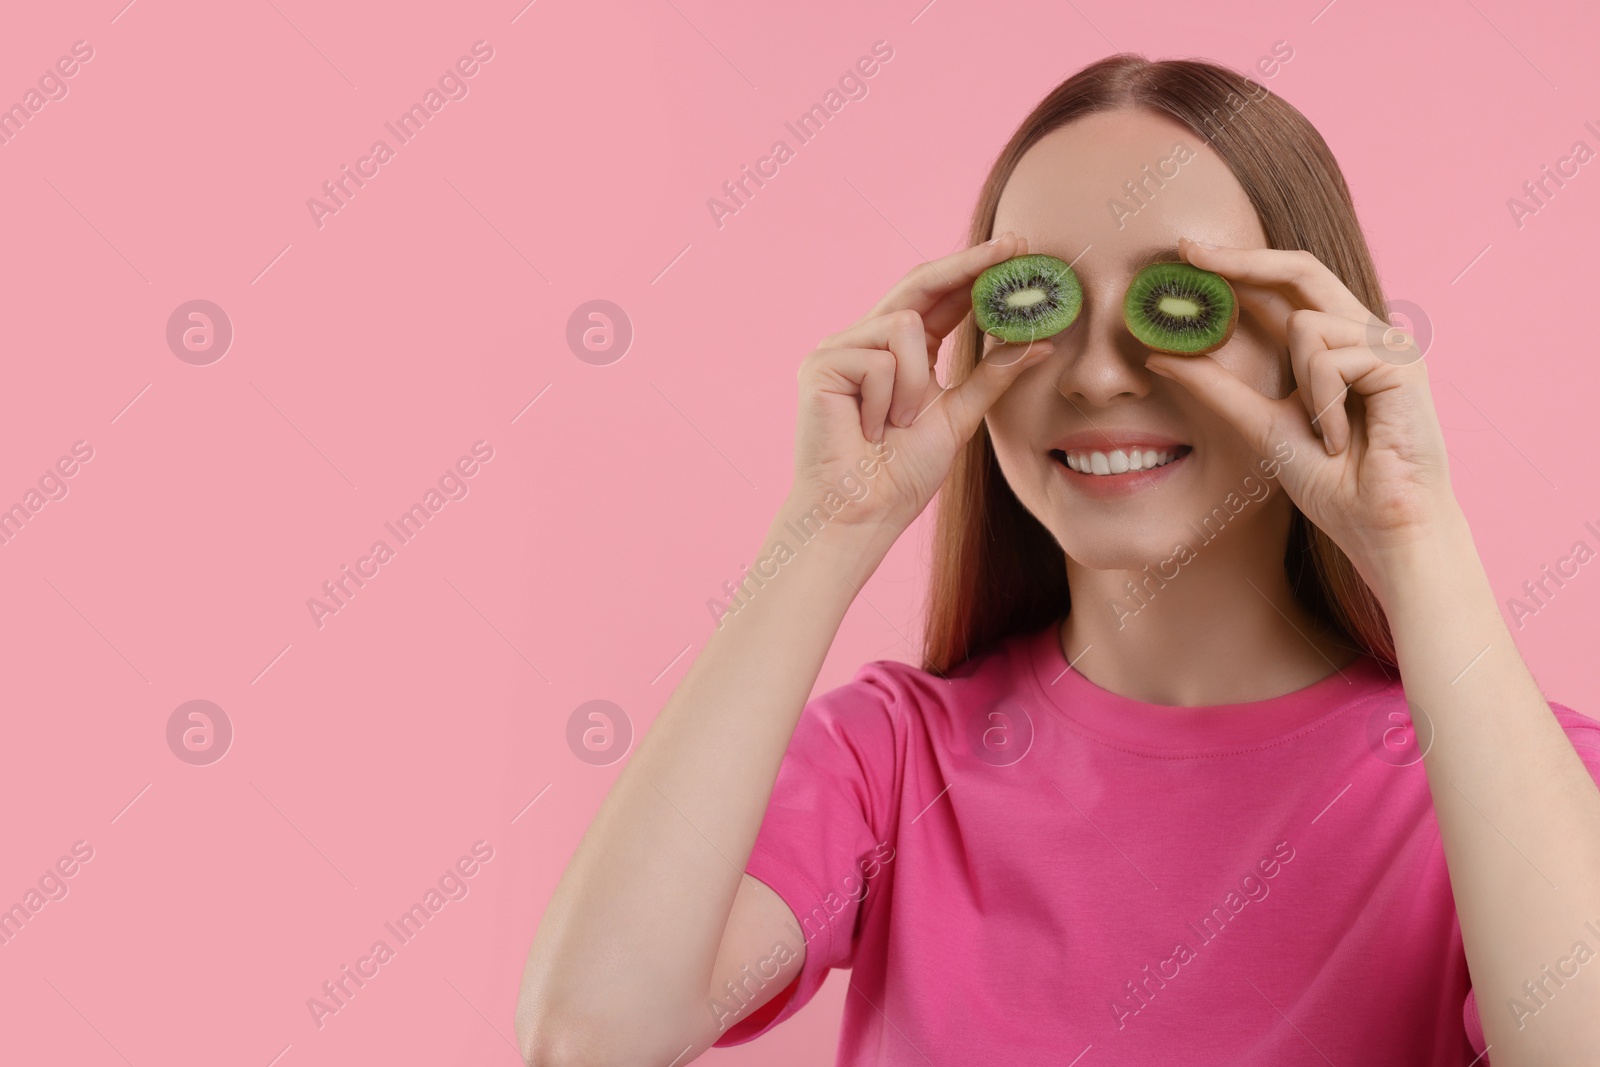 Photo of Young woman holding halves of kiwi near her eyes on pink background. Space for text